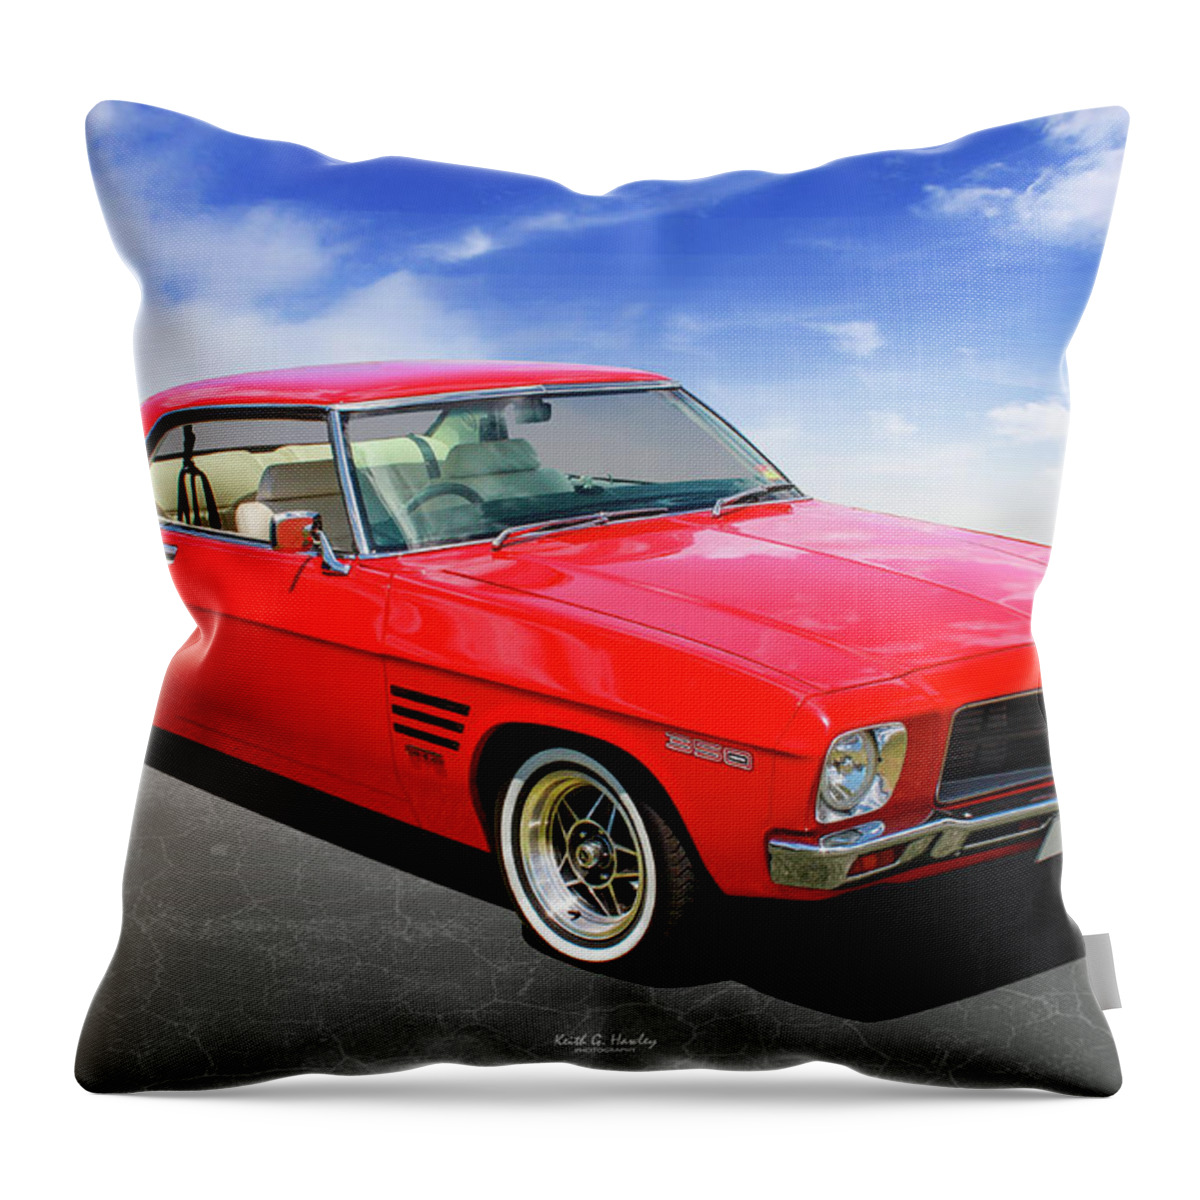 Car Throw Pillow featuring the photograph 350 Gts by Keith Hawley